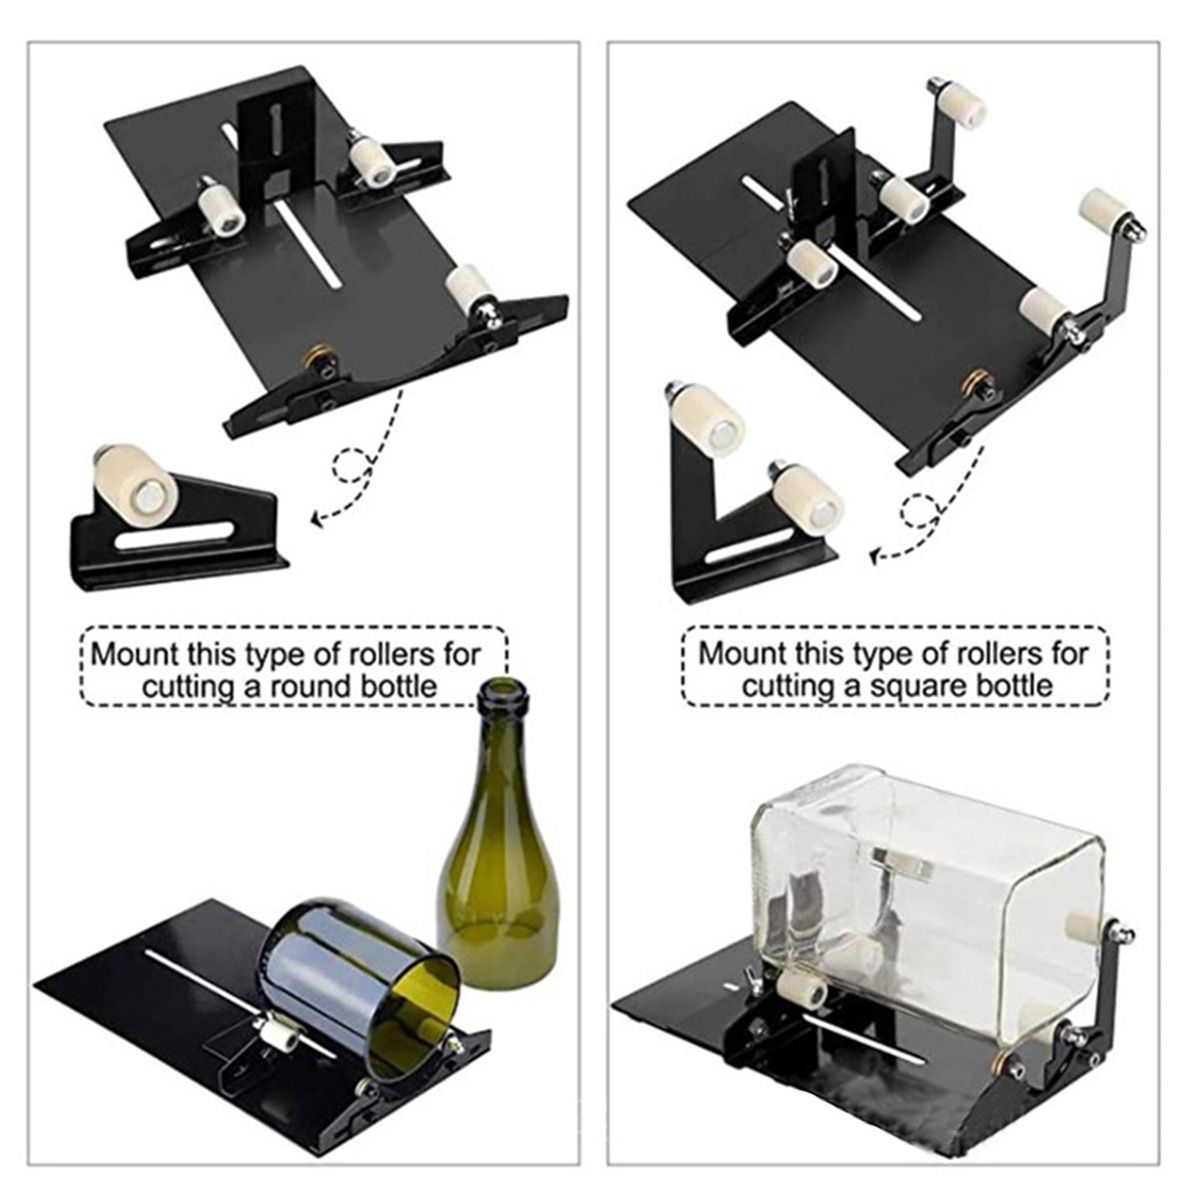 DIY-Glass-Bottle-Cutter-Cutting-Tool-Upgrade-Version-Square-amp-Round-Cutting-1736554